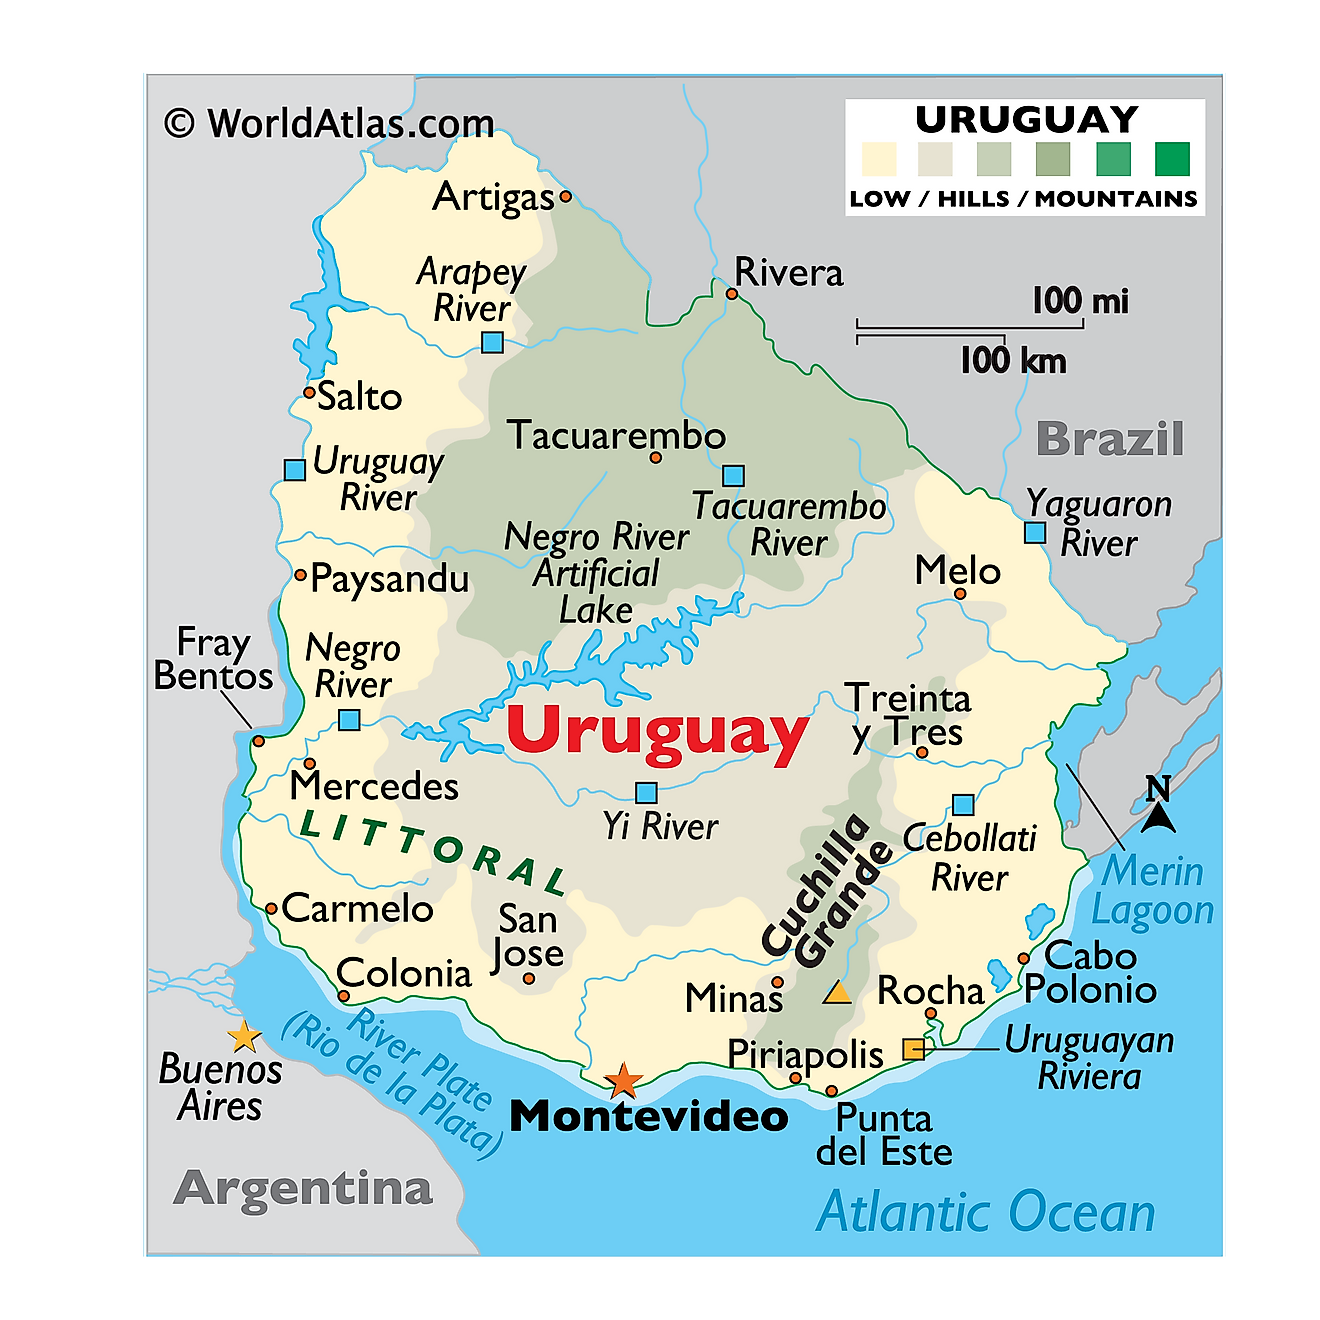 Physical Map of Uruguay showing relief, mountains, lakes, rivers, important cities, bordering countries, and more.